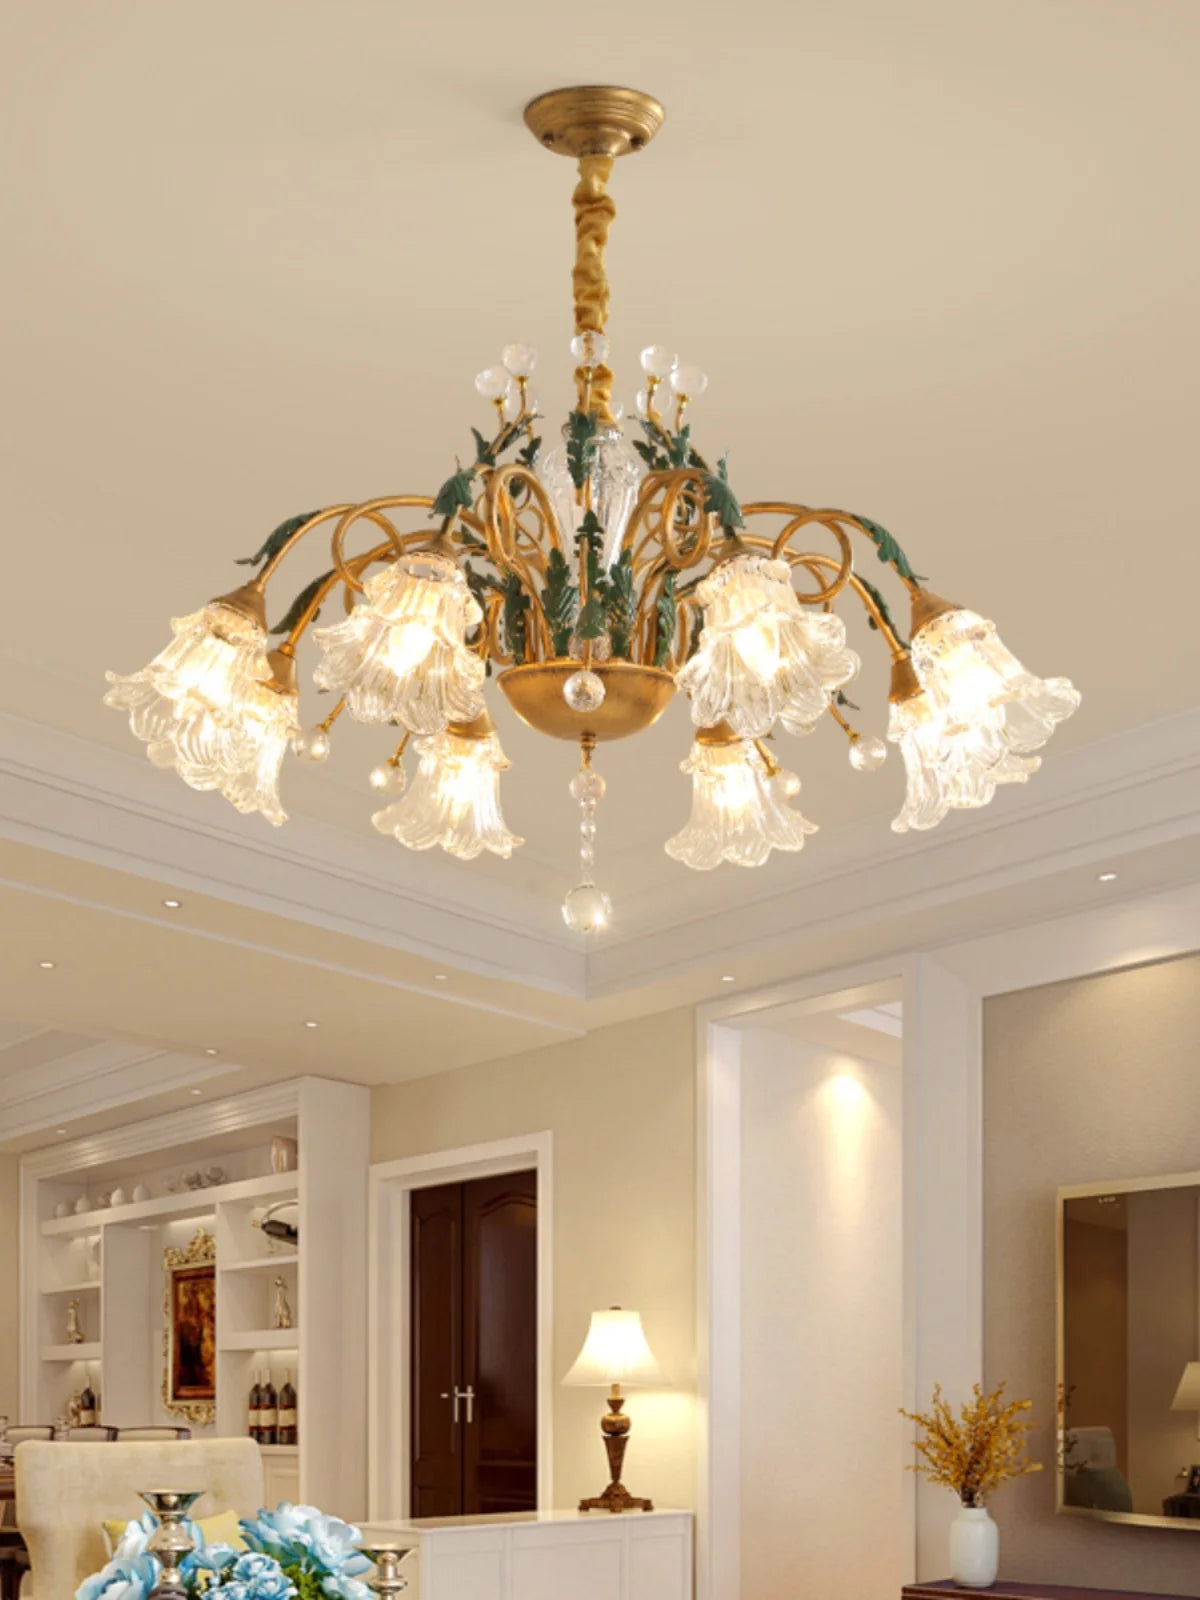 Kitchen Rustic Crystal Chandeliers fixture for Dinning room E14